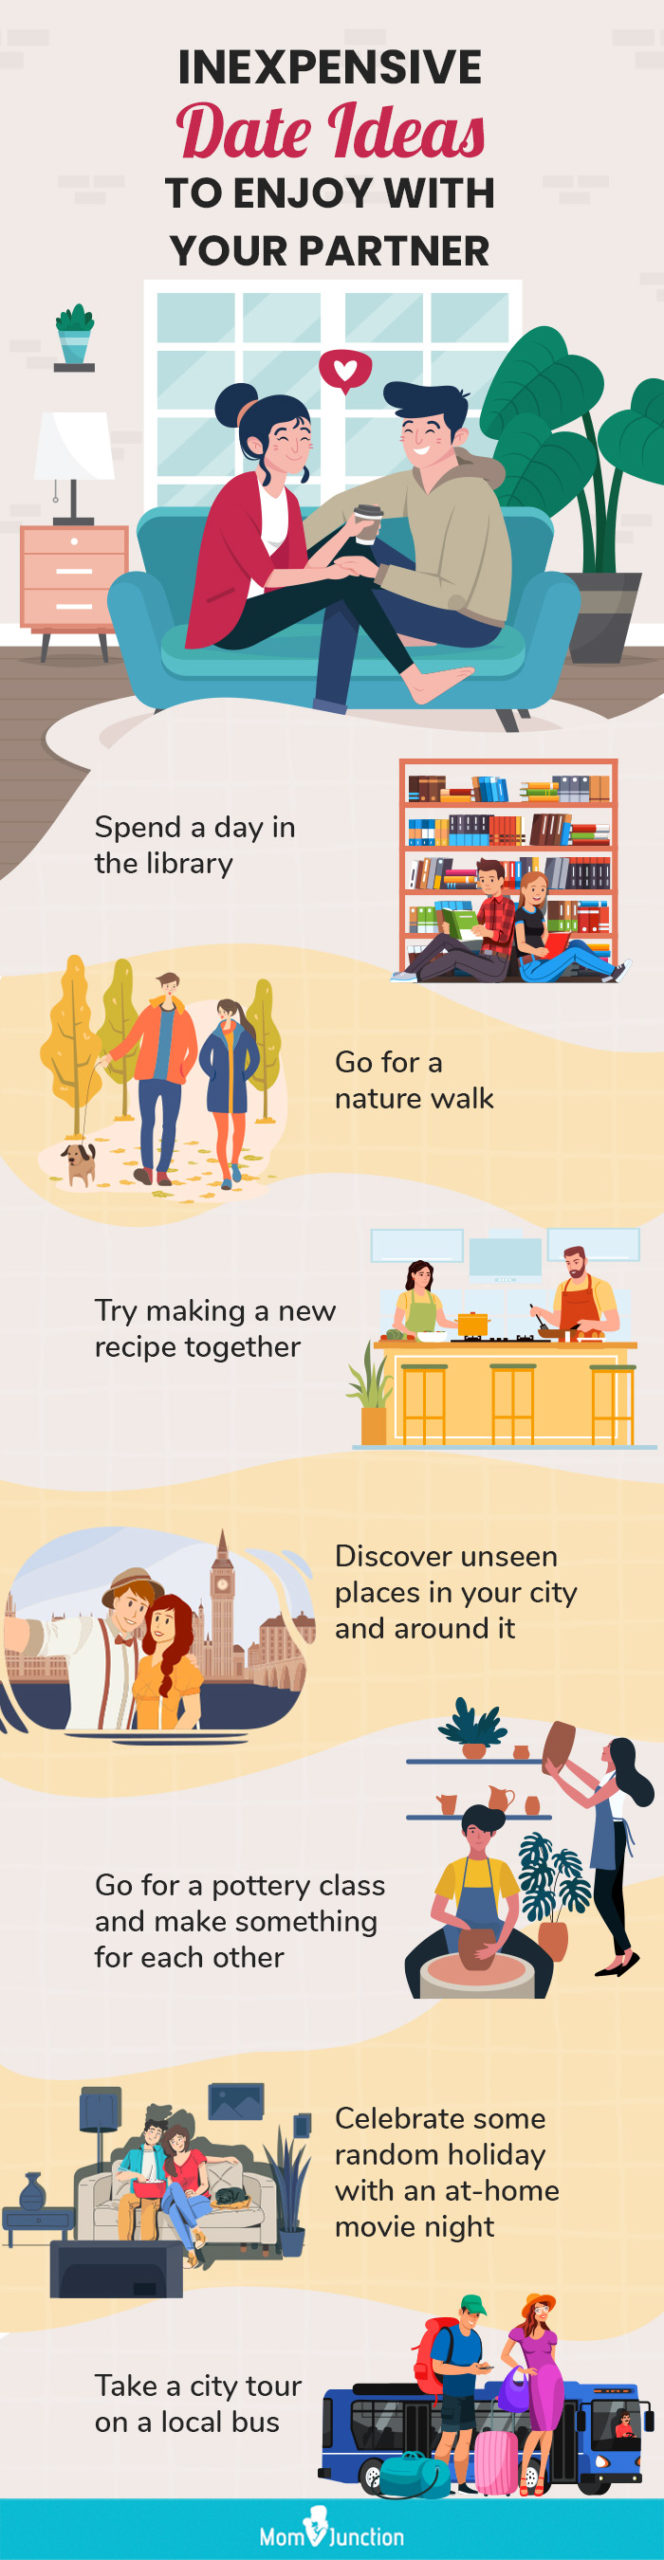 inexpensive date ideas to enjoy with your partner (infographic)